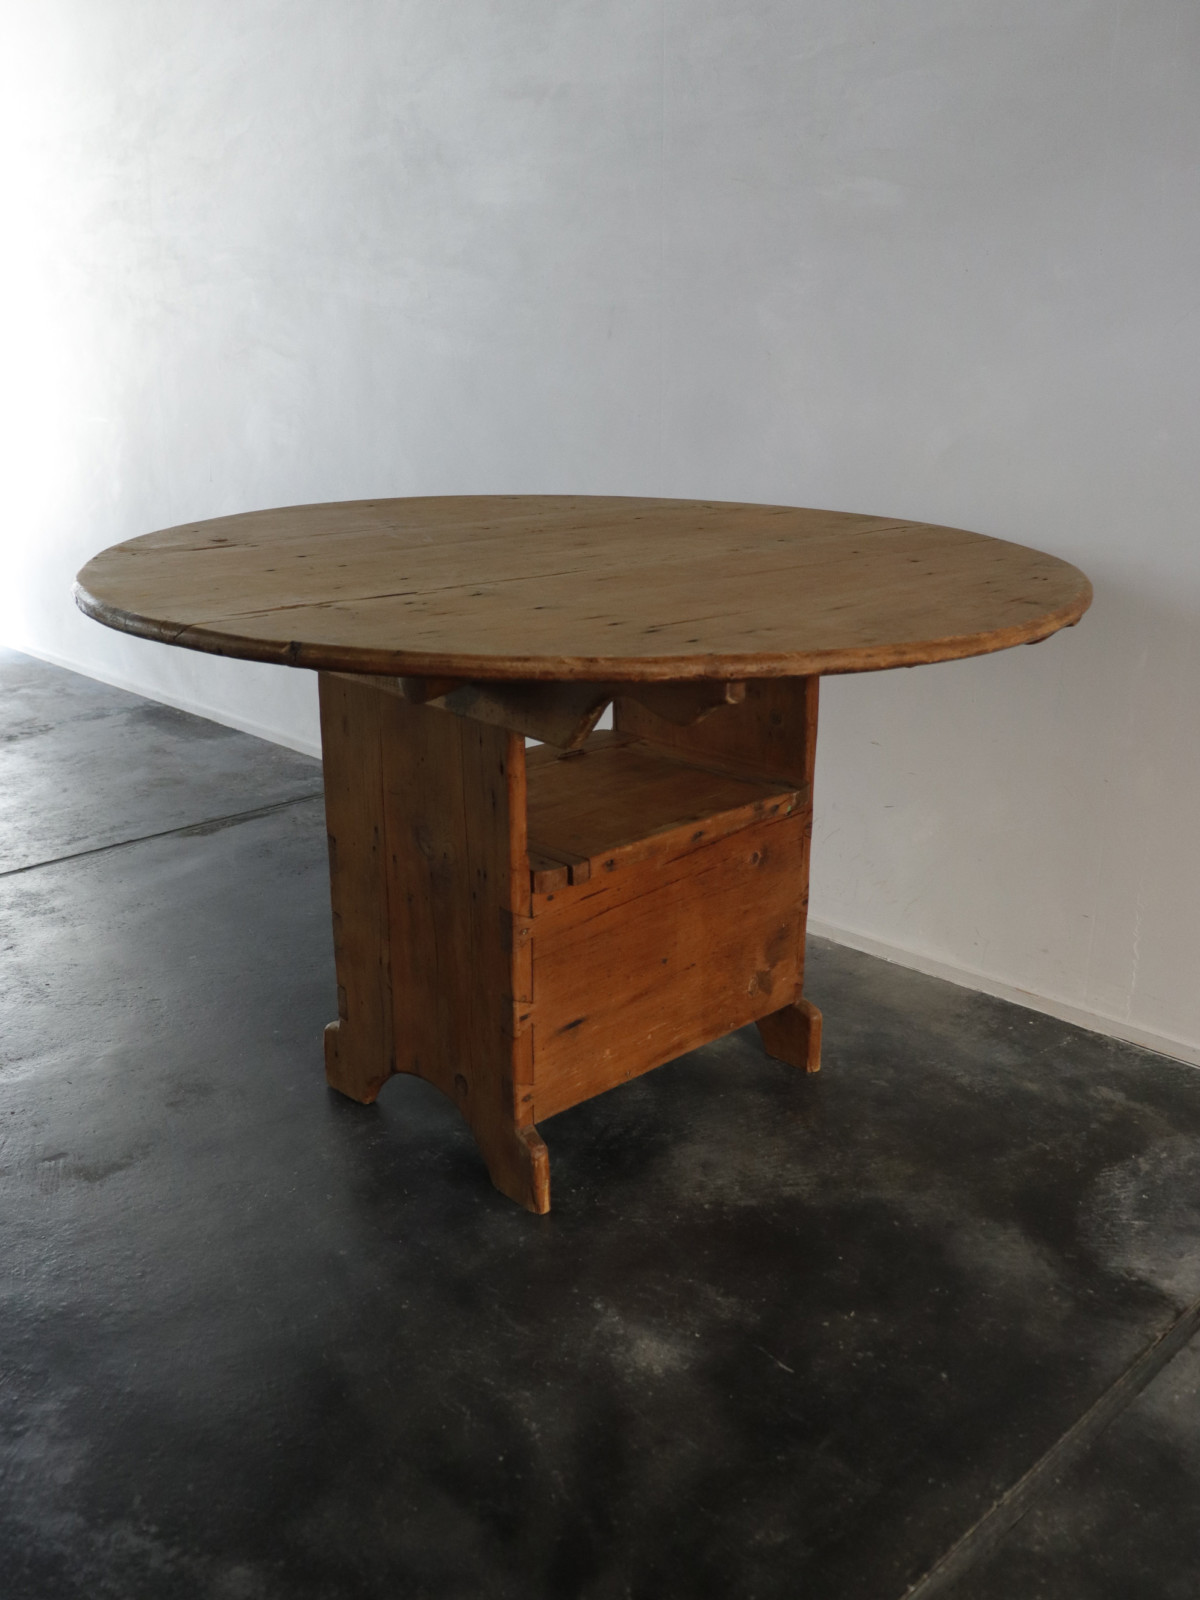 1880’s,winery table,France,pine wood